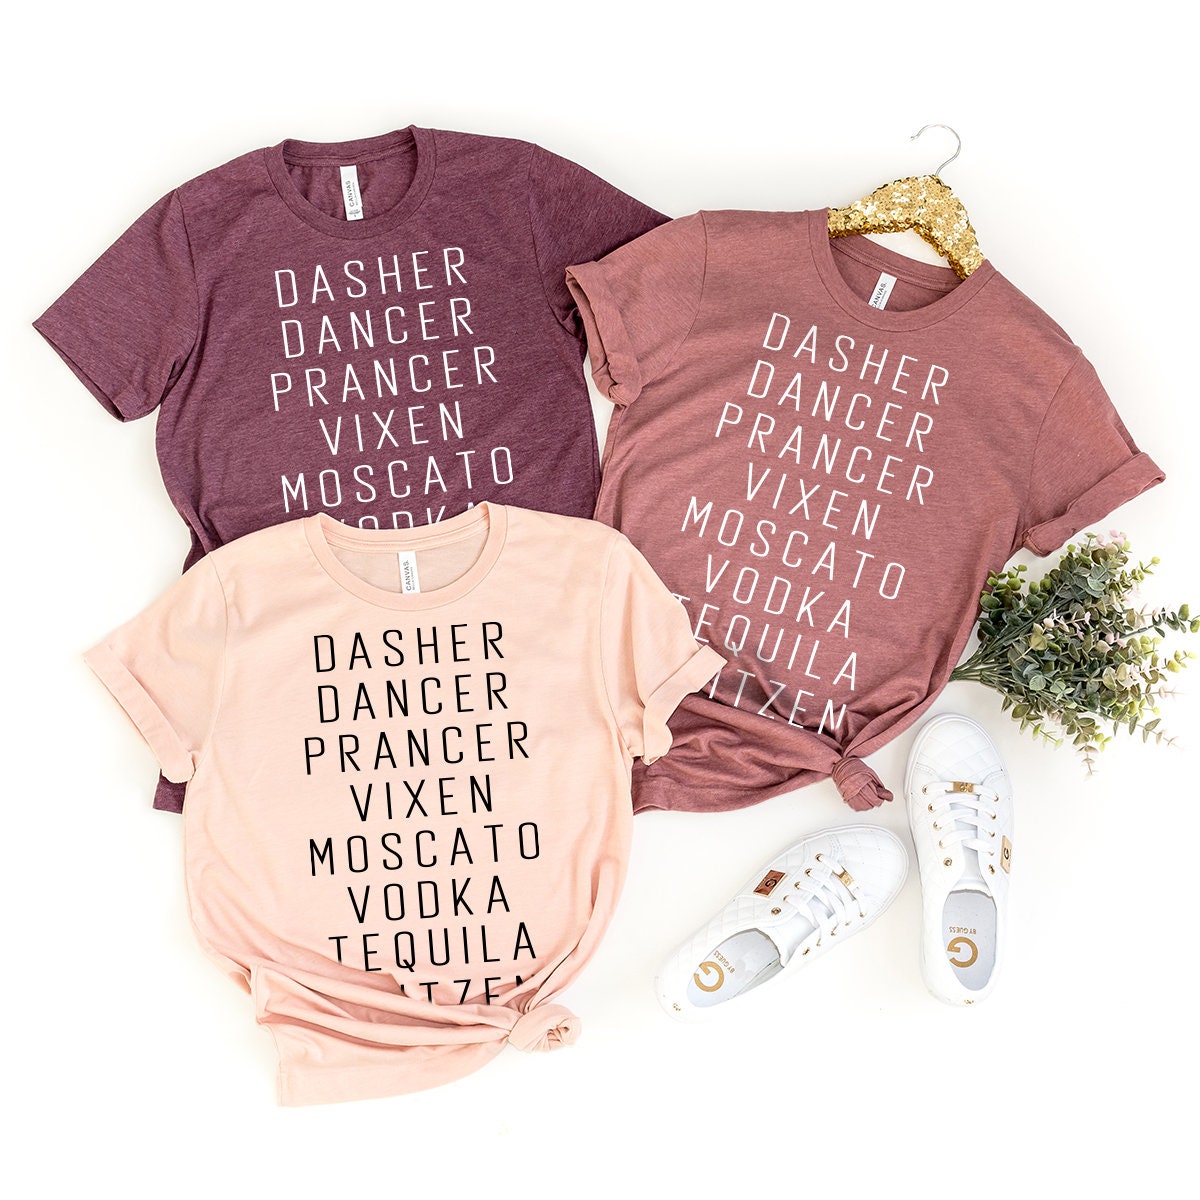 Funny Christmas Shirt, Funny Drinking Shirt, Funny Alcoholic Shirt, Drinking Party Tee, Dasher Dancer Prancer Vixen Moscato Vodka Tequila - Fastdeliverytees.com